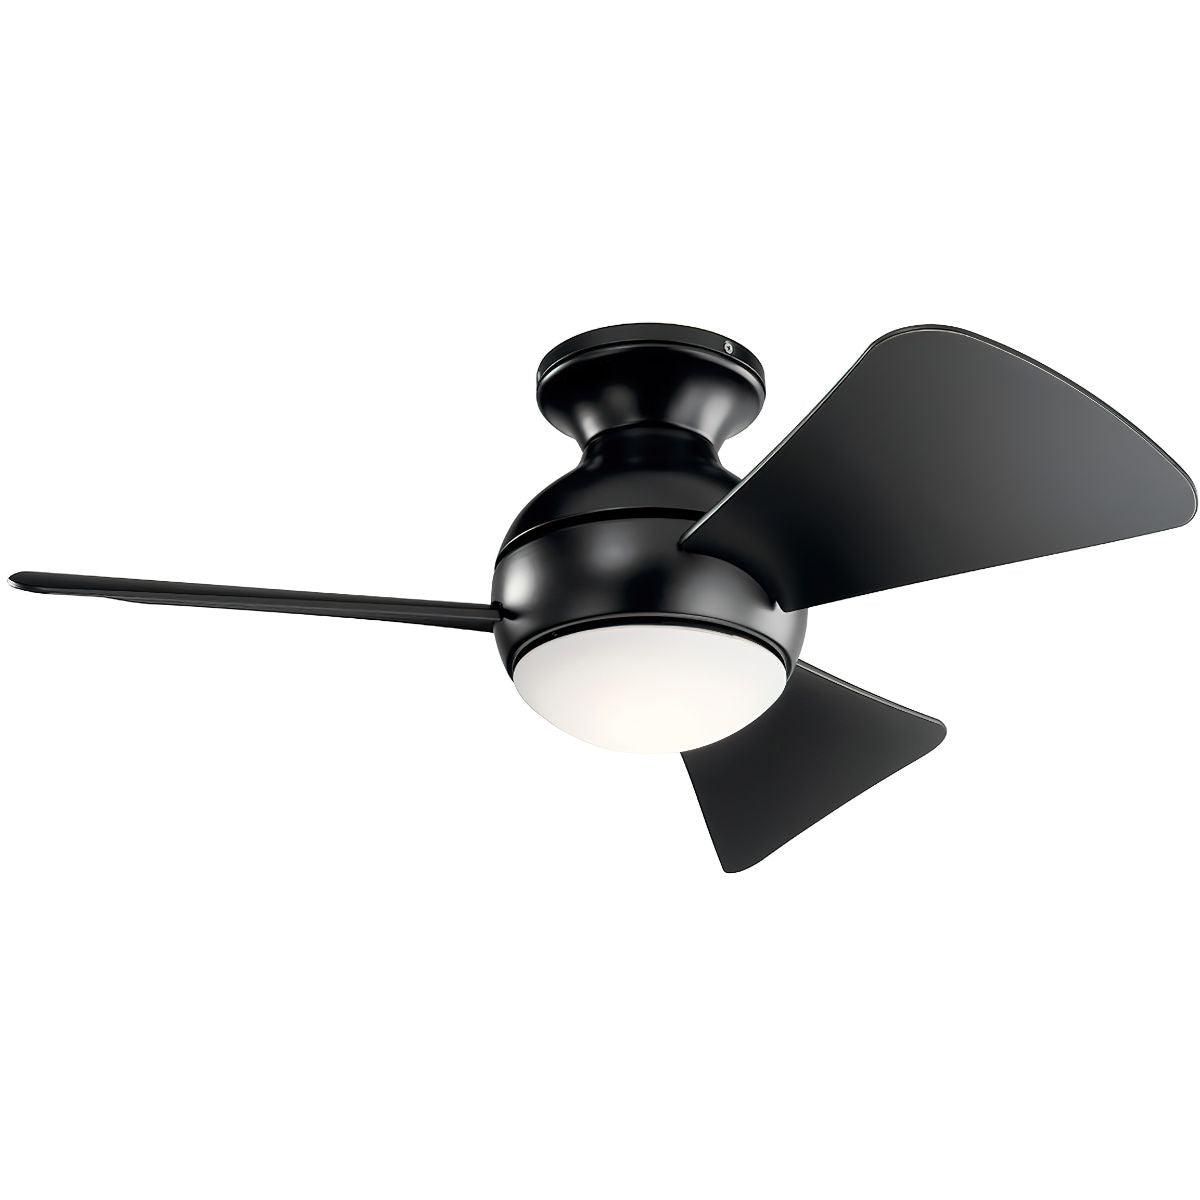 Sola 34 Inch Propeller Outdoor Ceiling Fan With Light, Wall Control Included - Bees Lighting